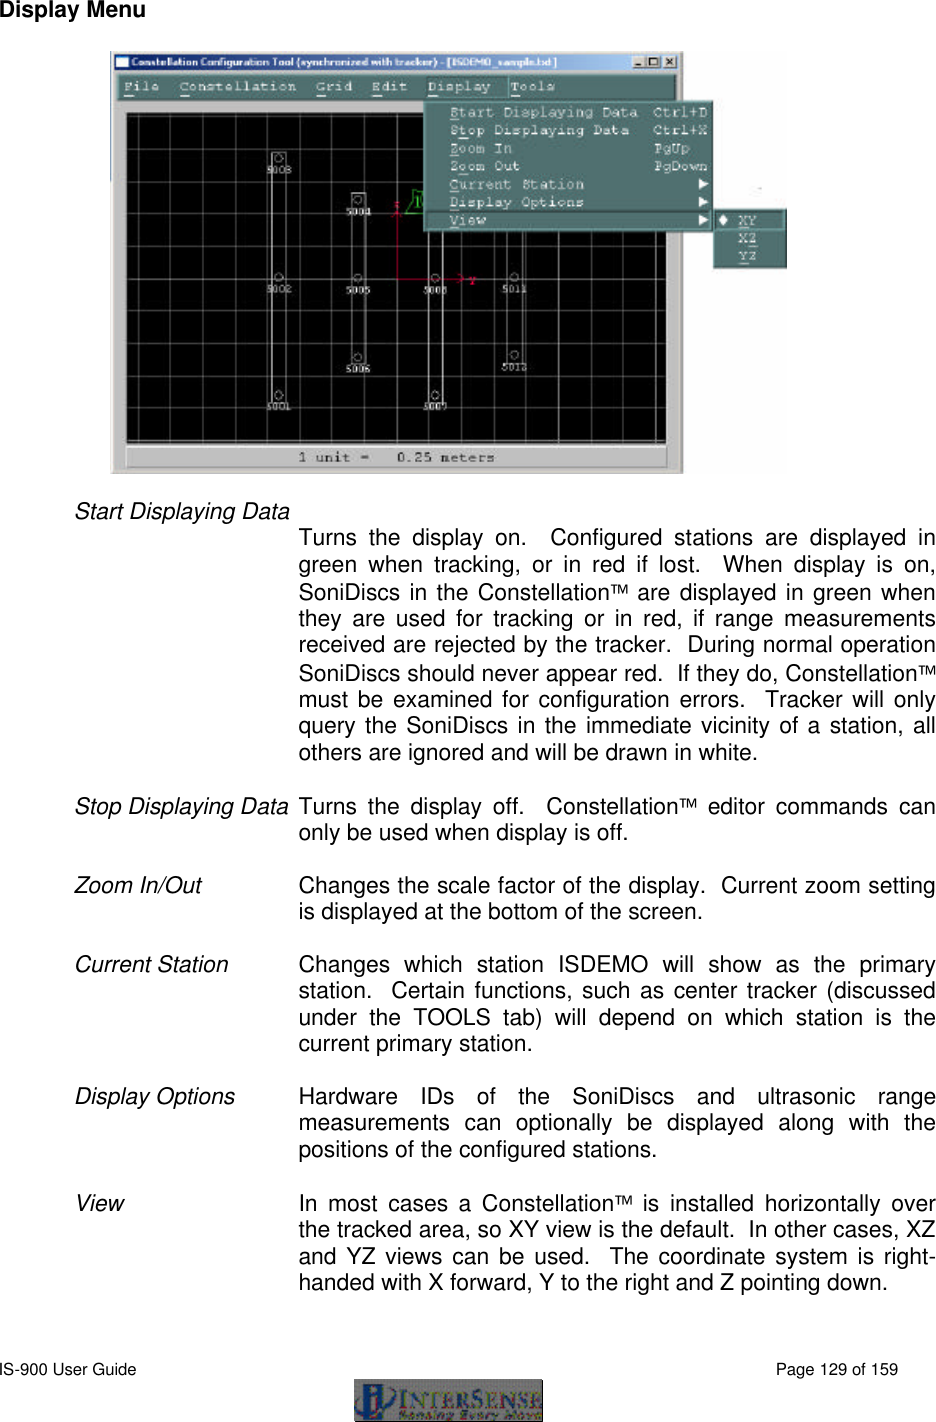  IS-900 User Guide                                                                                                                                          Page 129 of 159  Display Menu  Start Displaying Data Turns the display on.  Configured stations are displayed in green when tracking, or in red if lost.  When display is on, SoniDiscs in the Constellation are displayed in green when they are used for tracking or in red, if range measurements received are rejected by the tracker.  During normal operation SoniDiscs should never appear red.  If they do, Constellation must be examined for configuration errors.  Tracker will only query the SoniDiscs in the immediate vicinity of a station, all others are ignored and will be drawn in white.  Stop Displaying Data Turns the display off.  Constellation editor commands can only be used when display is off.  Zoom In/Out Changes the scale factor of the display.  Current zoom setting is displayed at the bottom of the screen.  Current Station  Changes which station ISDEMO will show as the primary station.  Certain functions, such as center tracker (discussed under the TOOLS tab) will depend on which station is the current primary station.     Display Options Hardware IDs of the SoniDiscs and ultrasonic range measurements can optionally be displayed along with the positions of the configured stations.   View In most cases a Constellation is installed horizontally over the tracked area, so XY view is the default.  In other cases, XZ and YZ views can be used.  The coordinate system is right-handed with X forward, Y to the right and Z pointing down.  